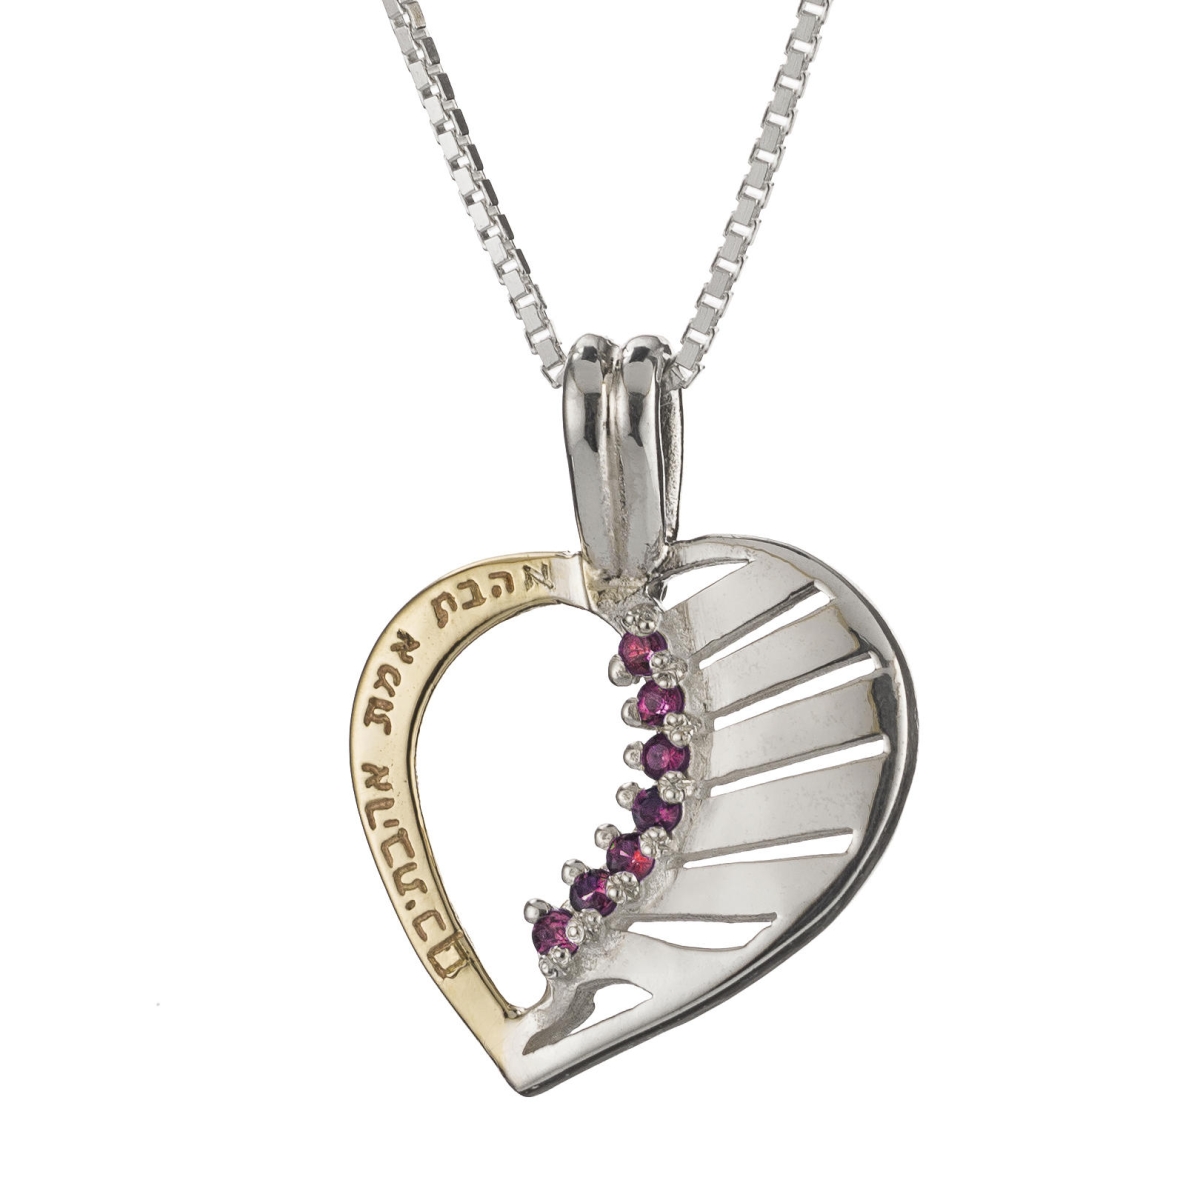 Sterling Silver and Gold True Love Heart Necklace with Gemstones - 1